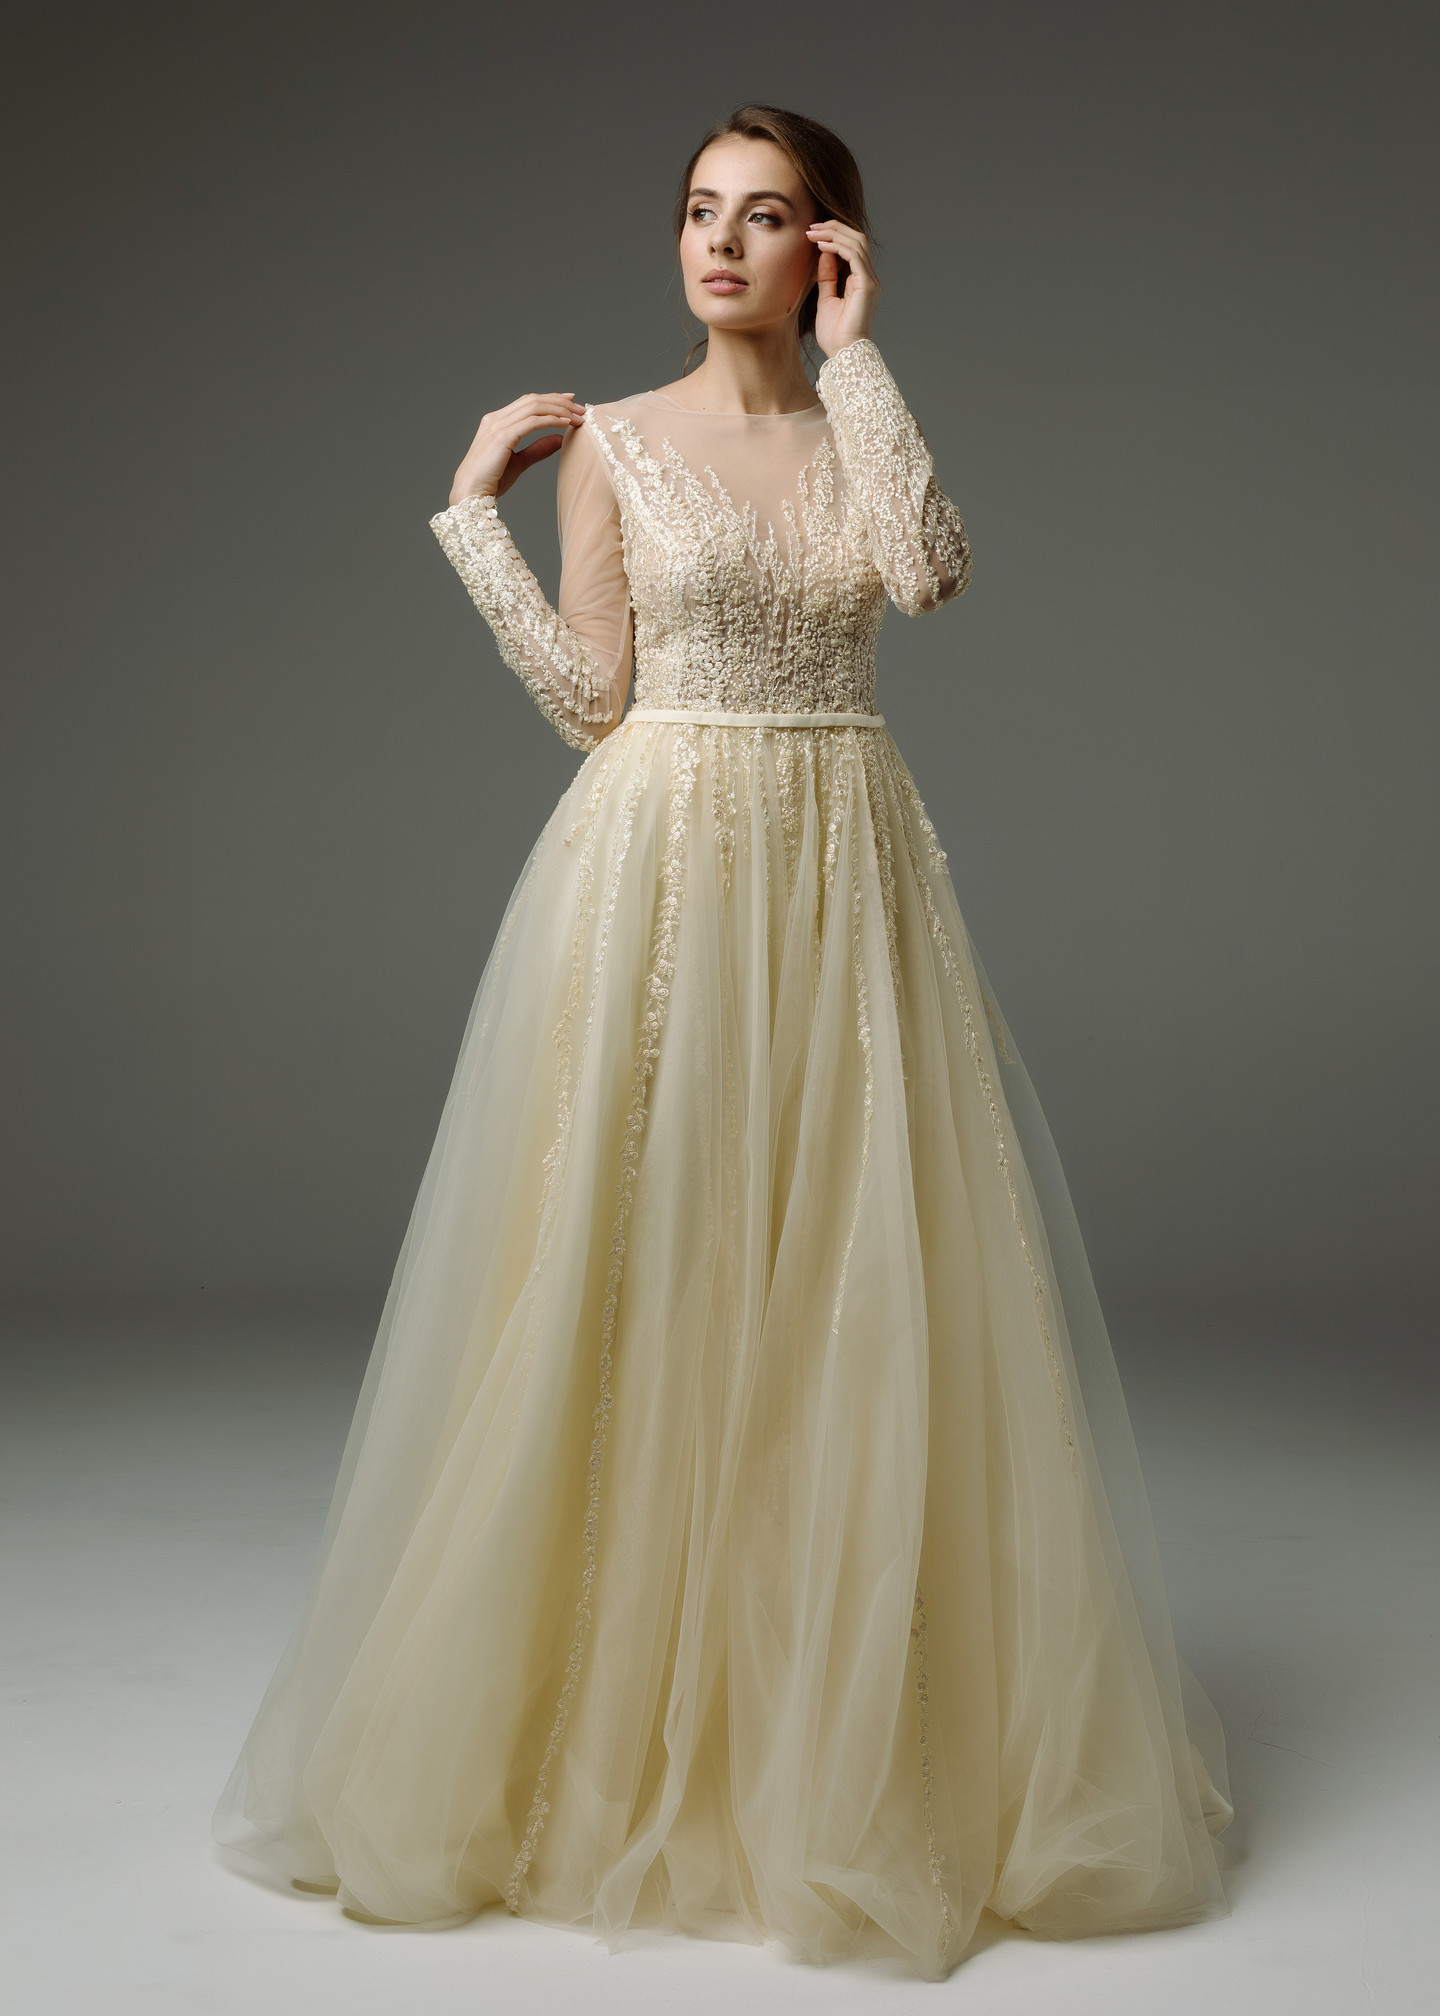 Matilda gown, 2018, couture, dress, evening, vanilla, lace, A-line, bridal, sleeves, tulle, archive